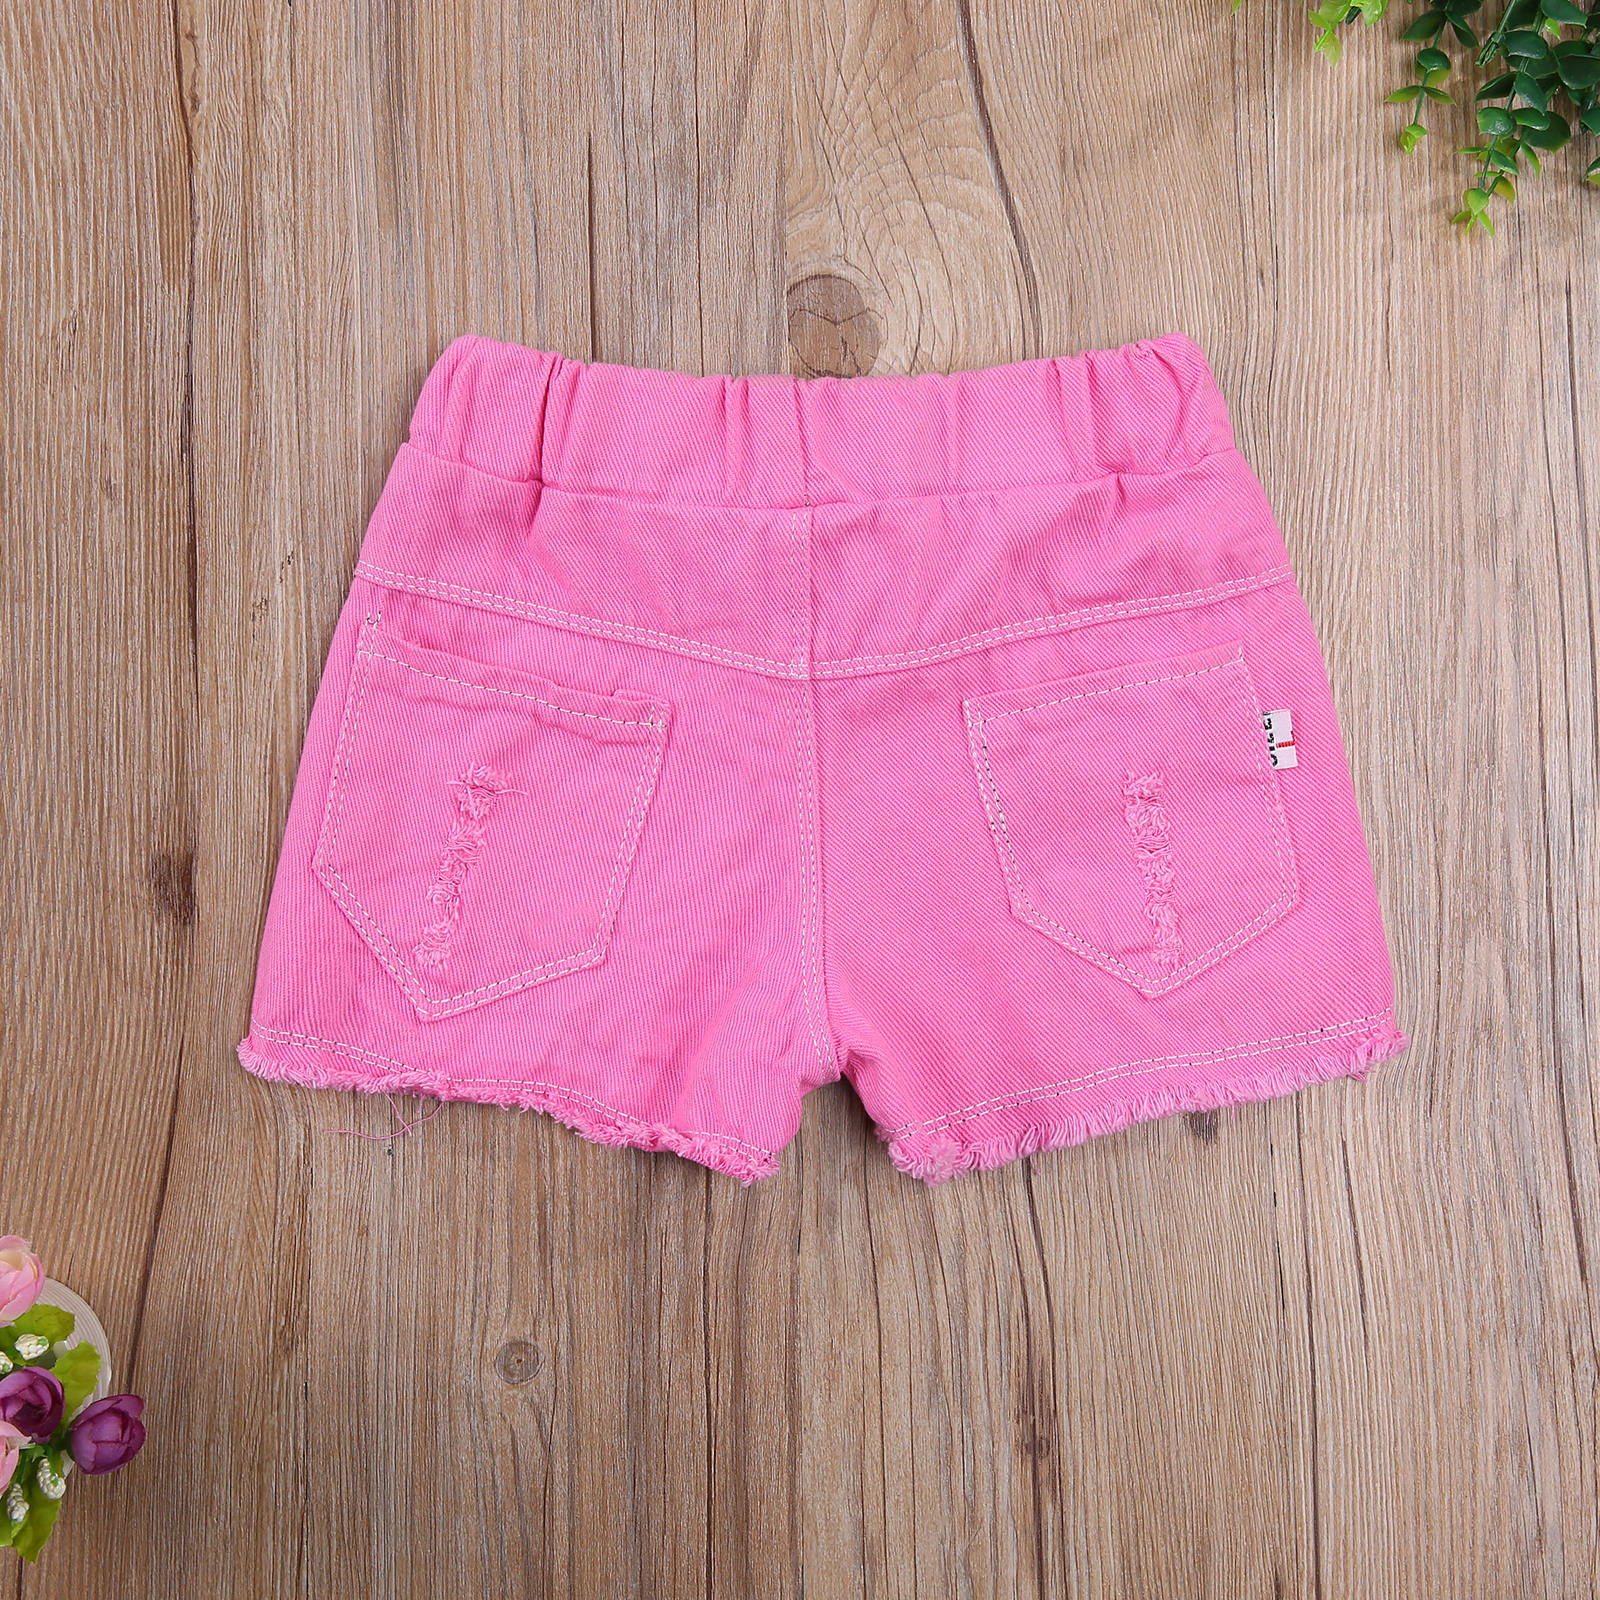 Eyicmarn Little Girls Ripped Denim Shorts, Solid Color High Elastic Waist Jeans Short Pants - image 4 of 6